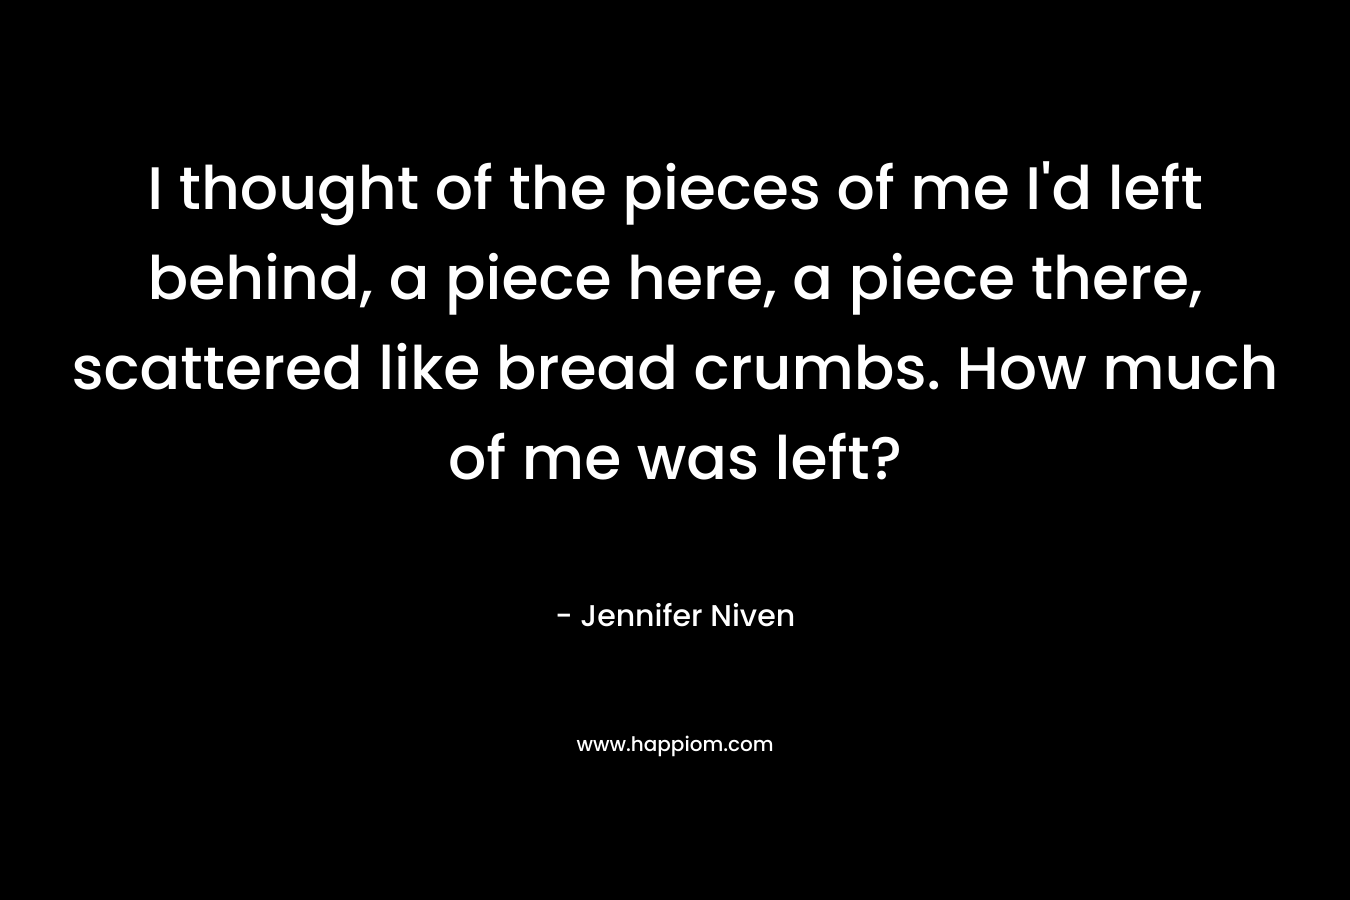 I thought of the pieces of me I’d left behind, a piece here, a piece there, scattered like bread crumbs. How much of me was left? – Jennifer Niven